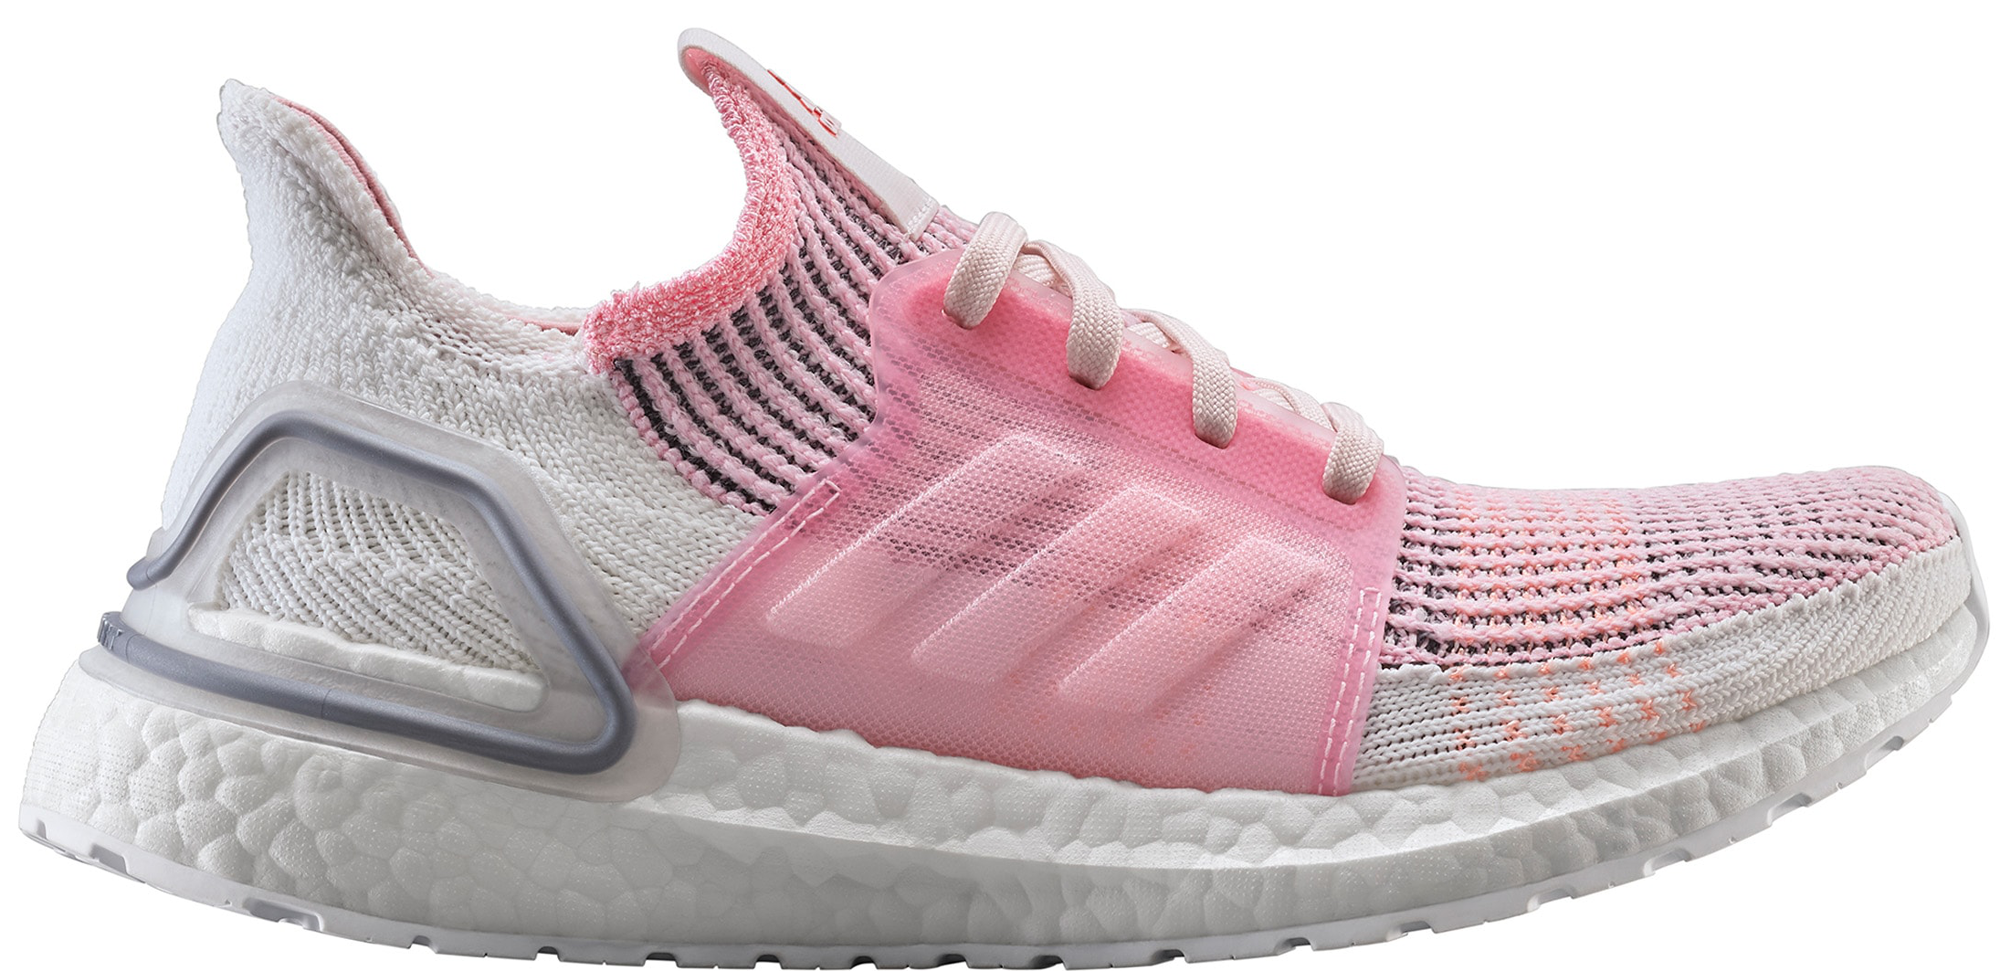 adidas Ultra Boost 19 True Pink Orchid 